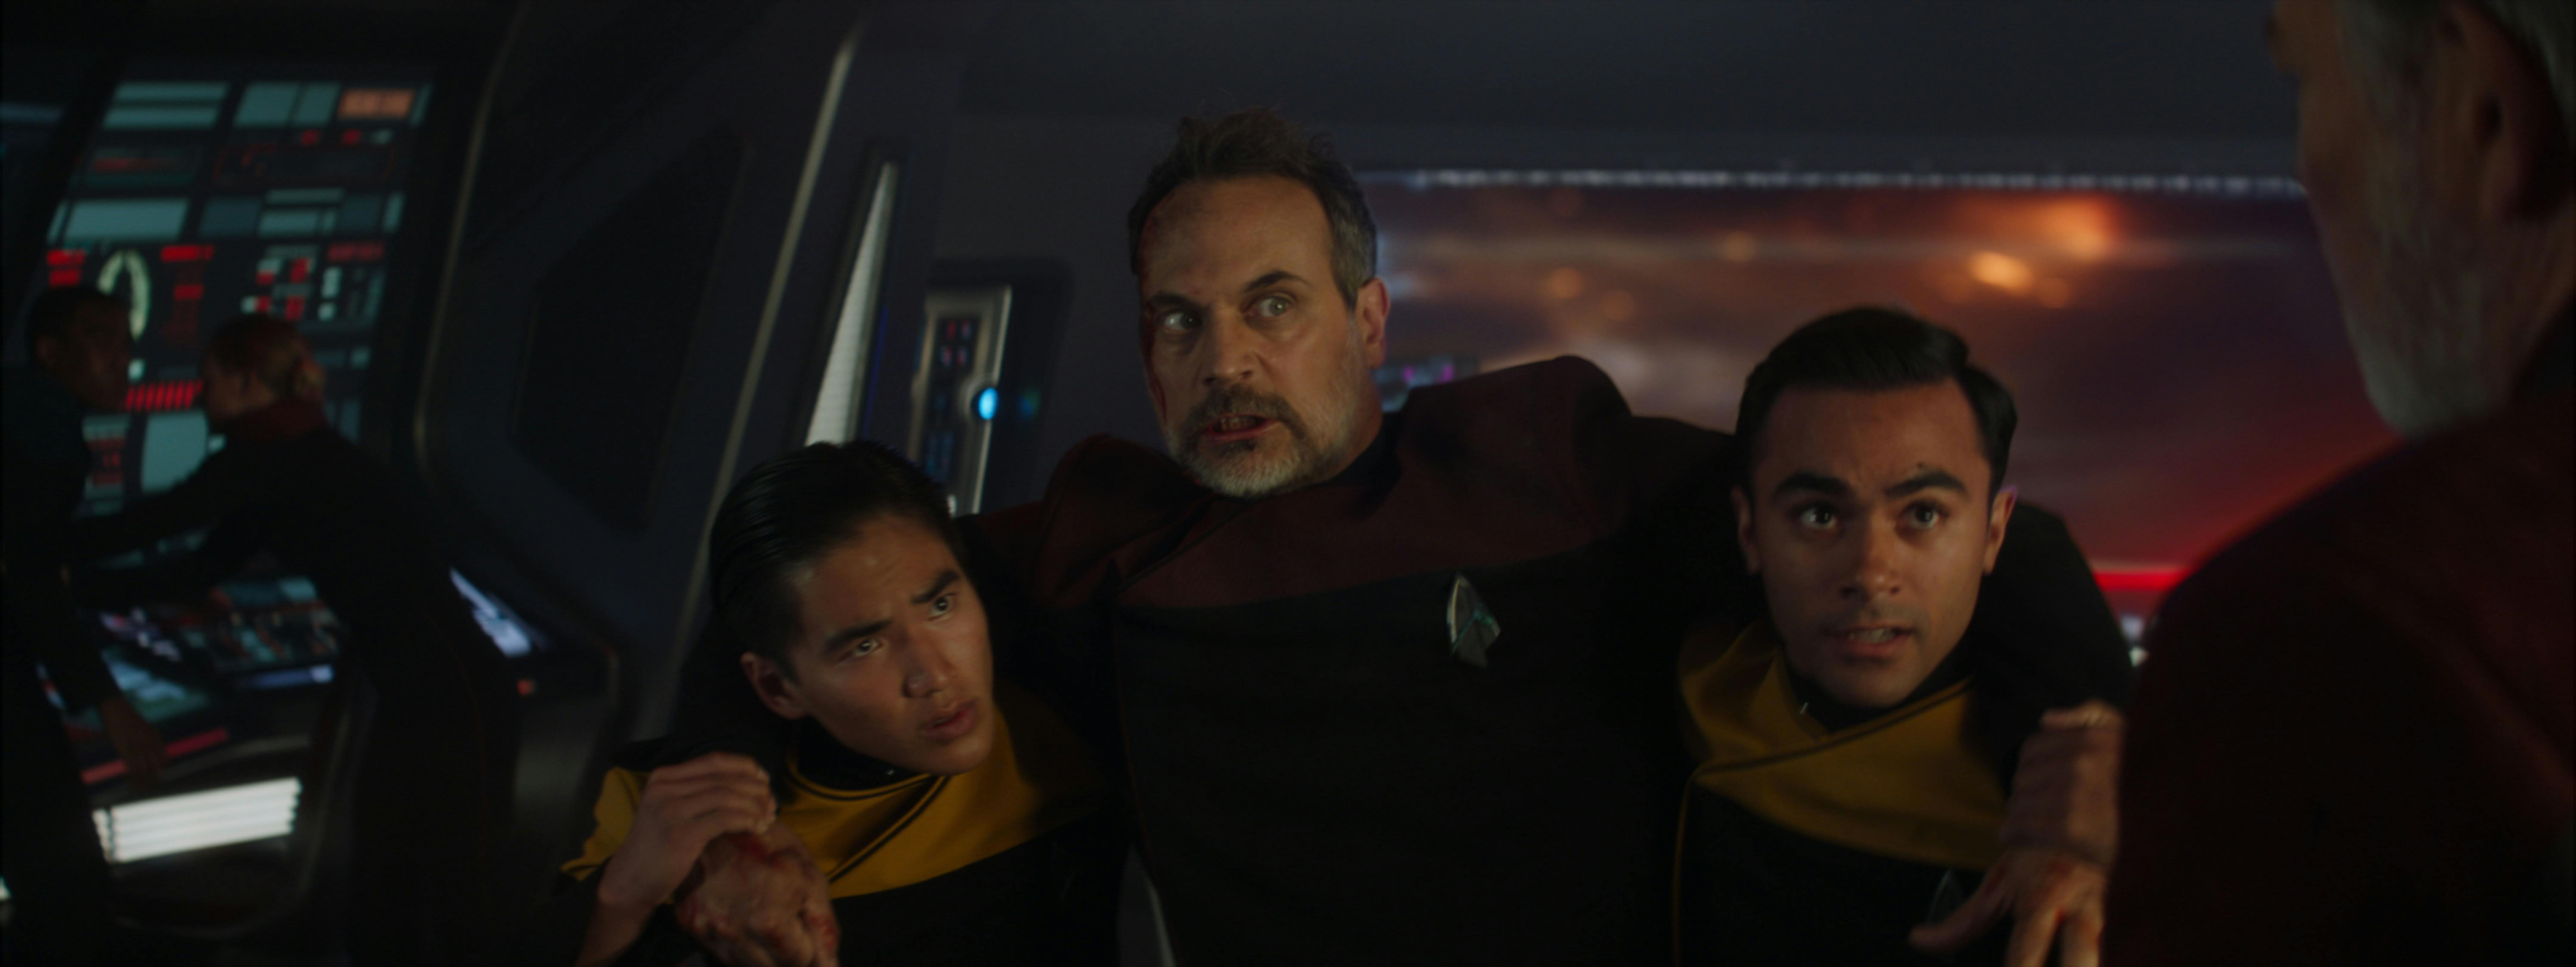 An injured Captain Liam Shaw is carried by two crewman on the bridge of the Titan in Star Trek: Picard